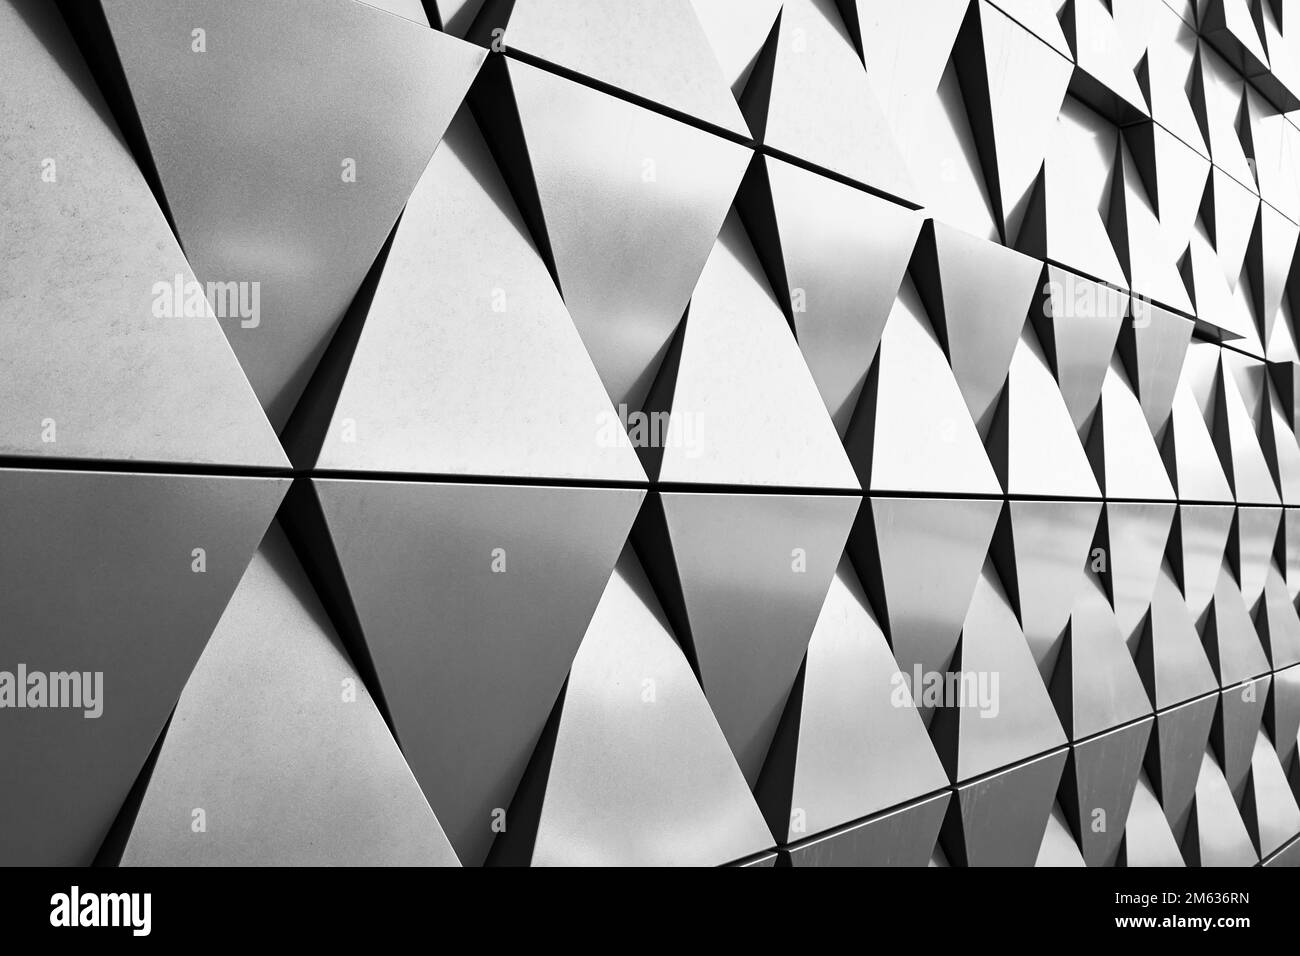 Silver wall facade with geometric shapes triangle elements. Abstract ...